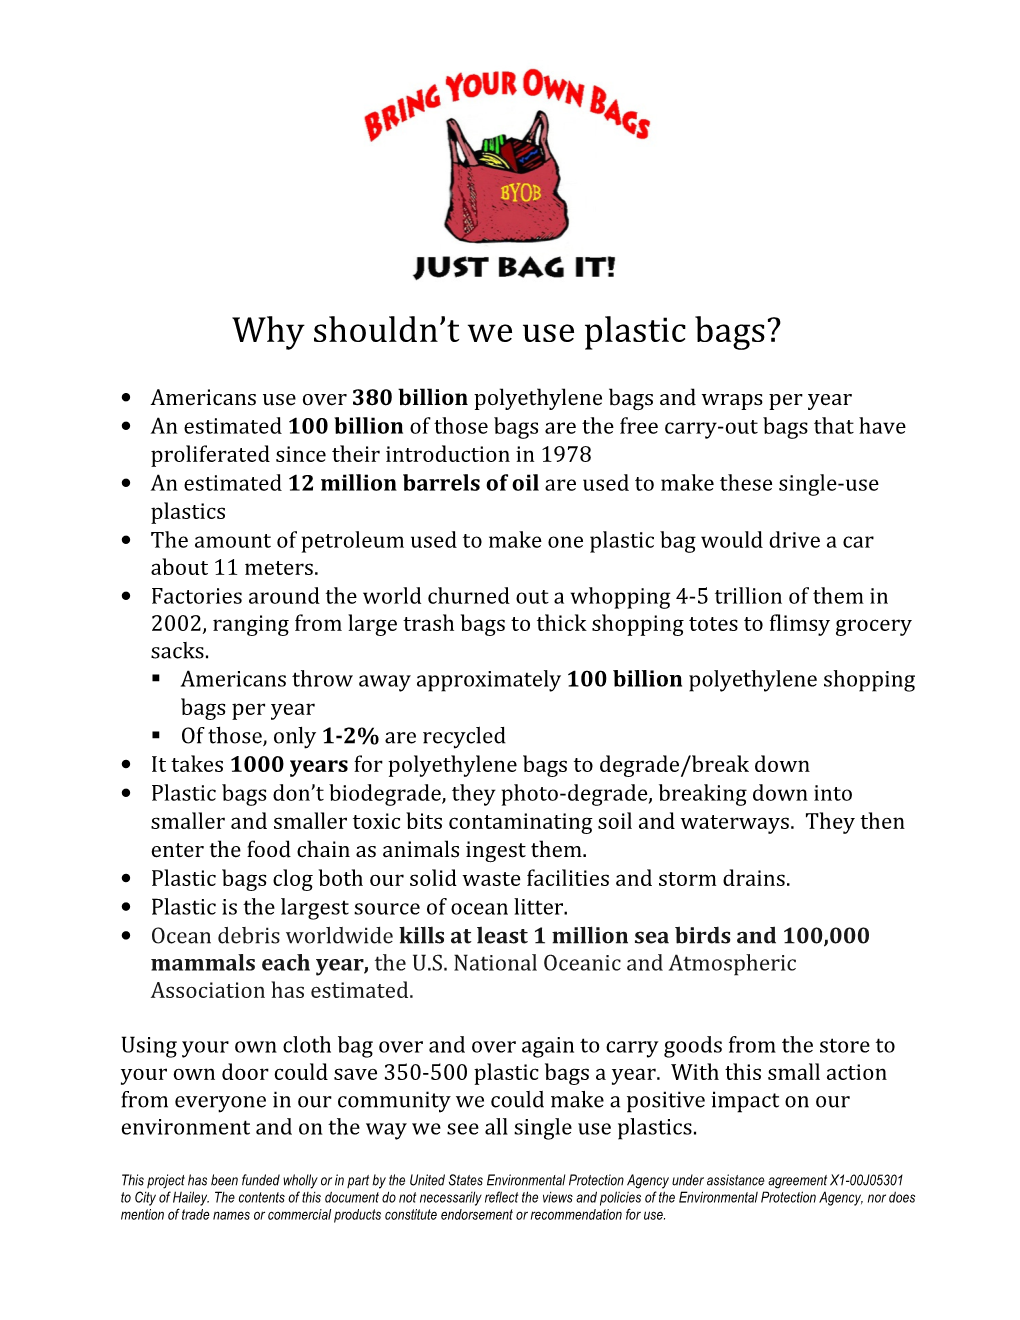 Why Shouldn't We Use Plastic Bags?